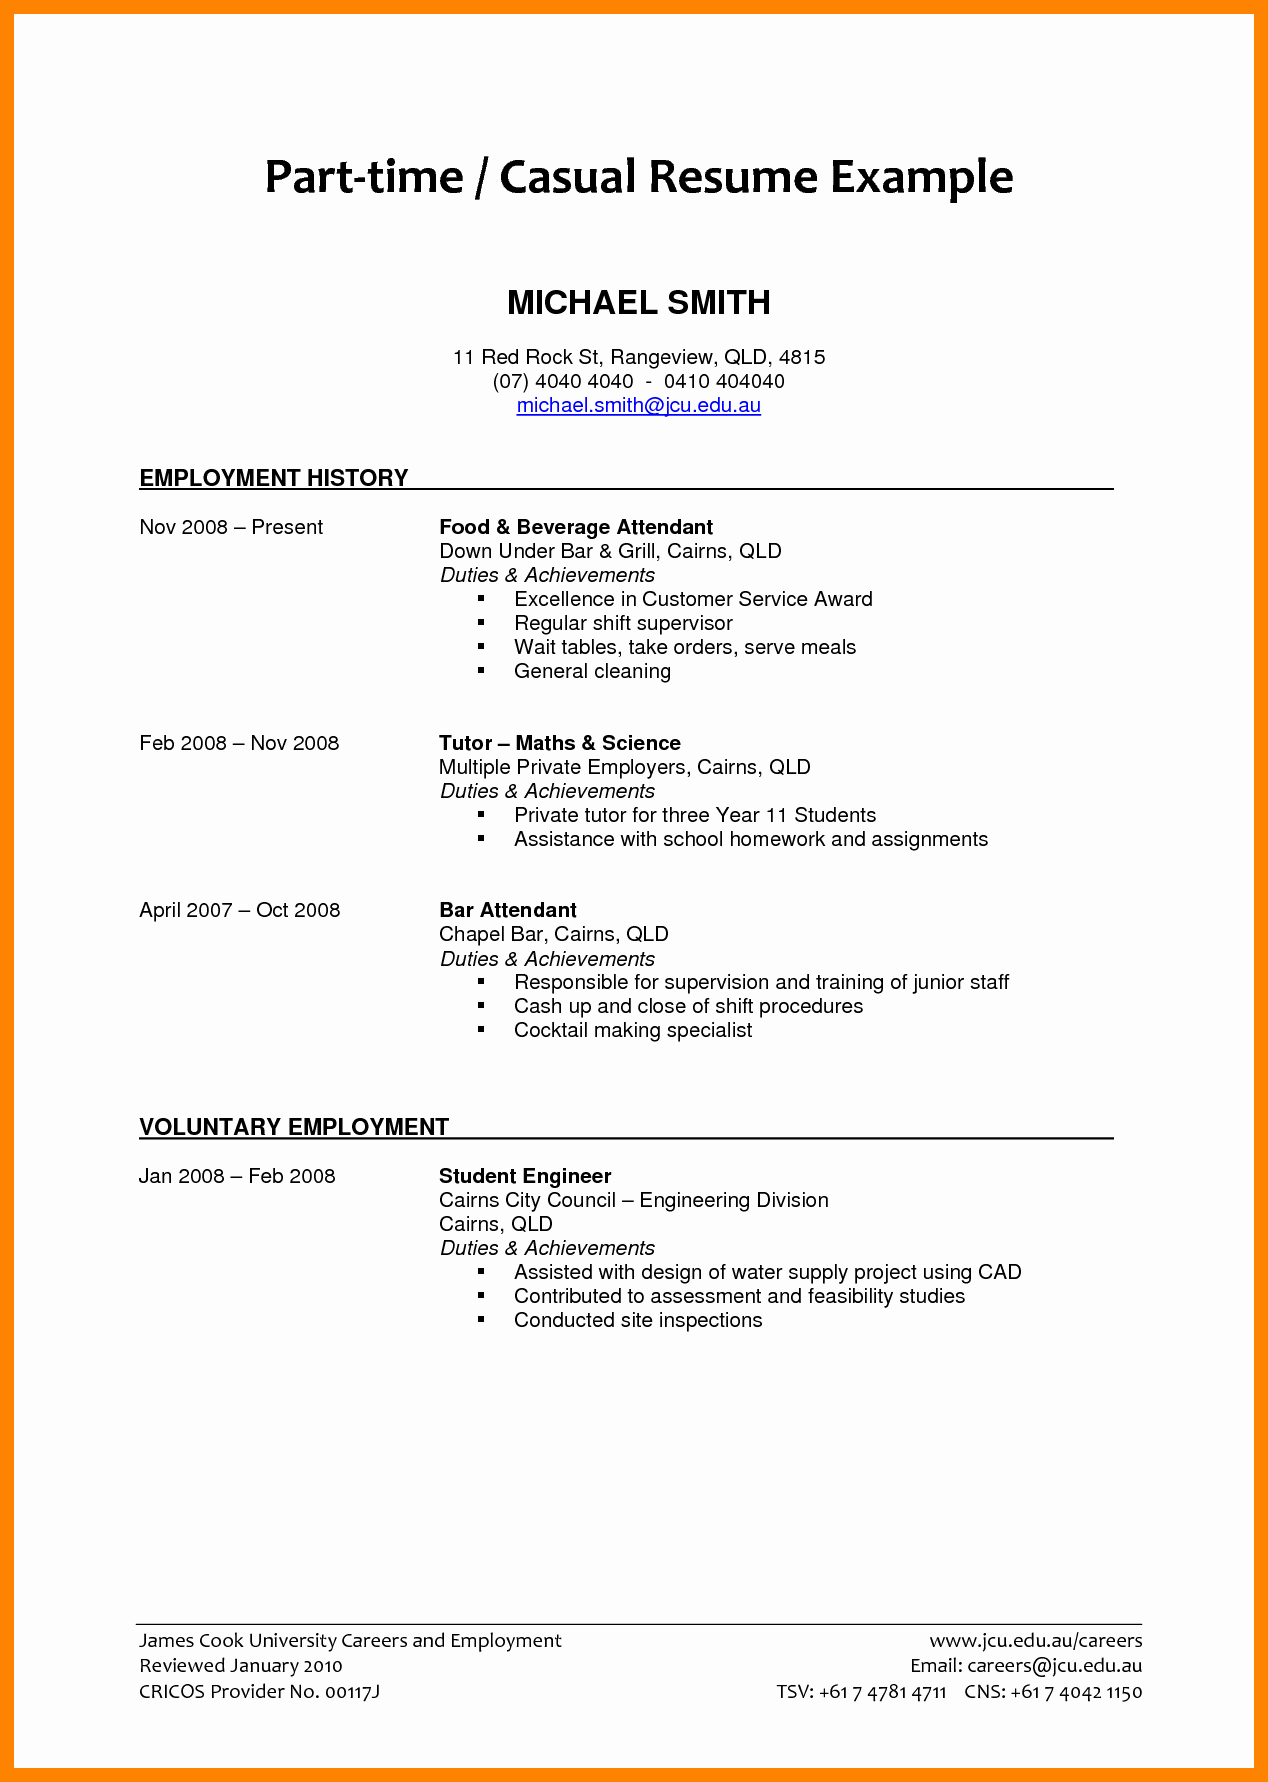 8 Resumes for Part Time Jobs